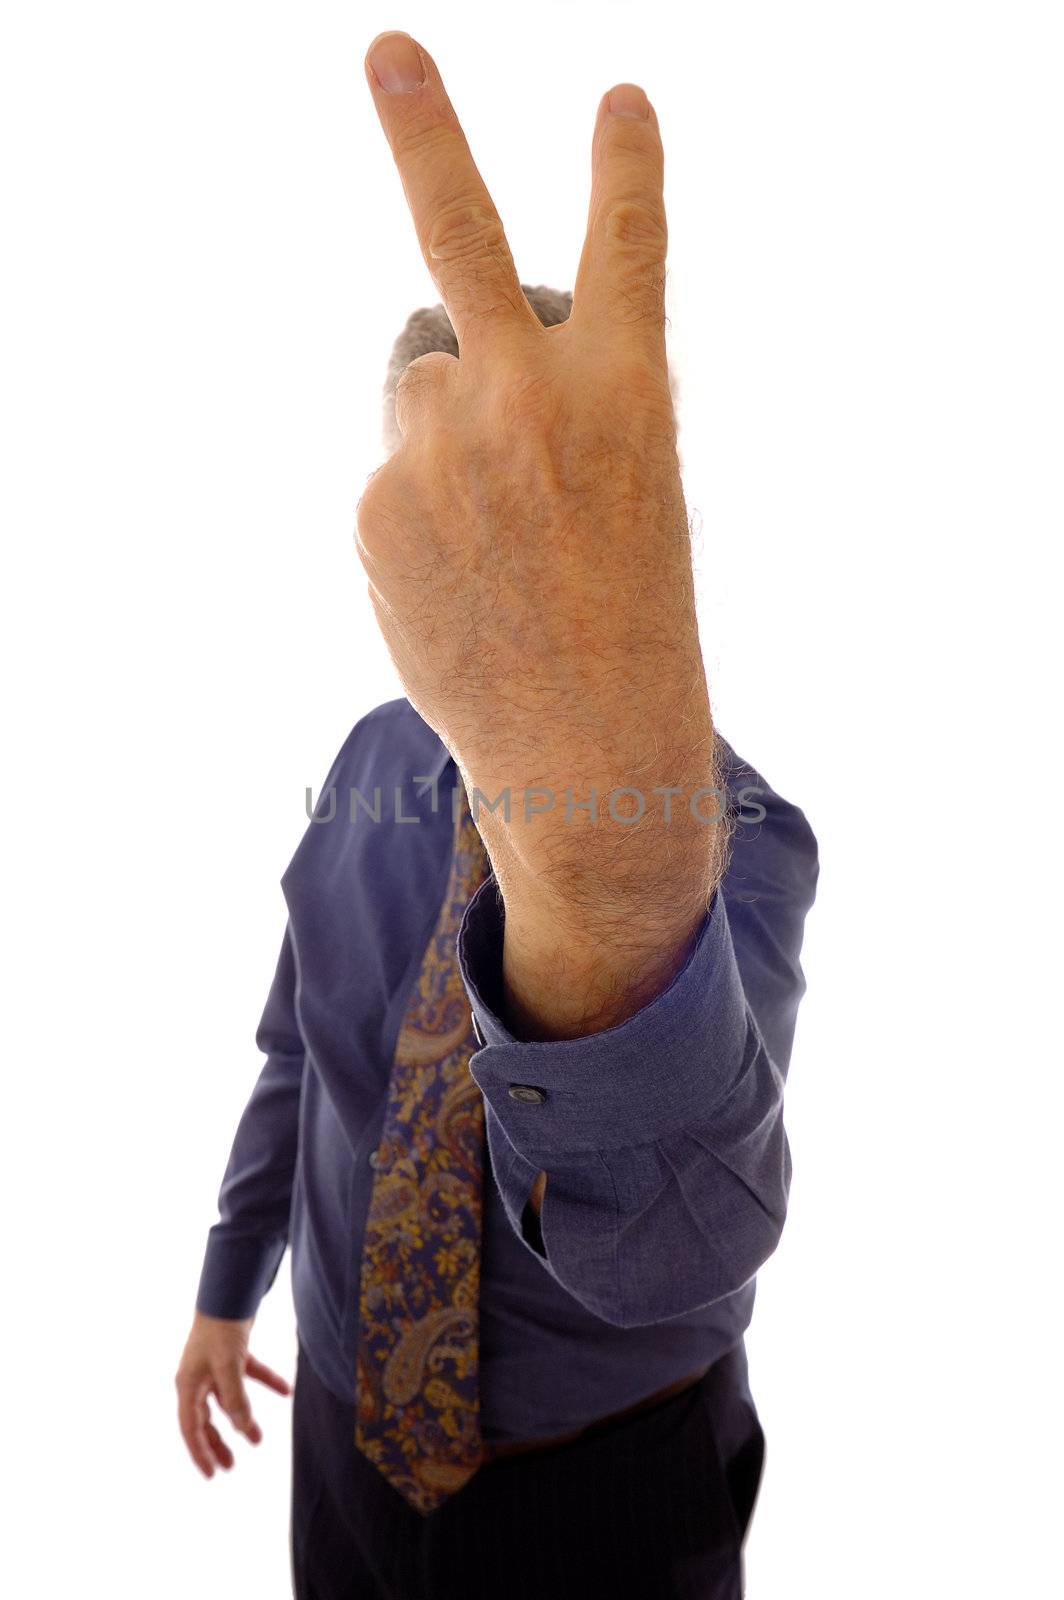 A senior businessman, in shirtsleeves, making a rude 'V' sign in your face.